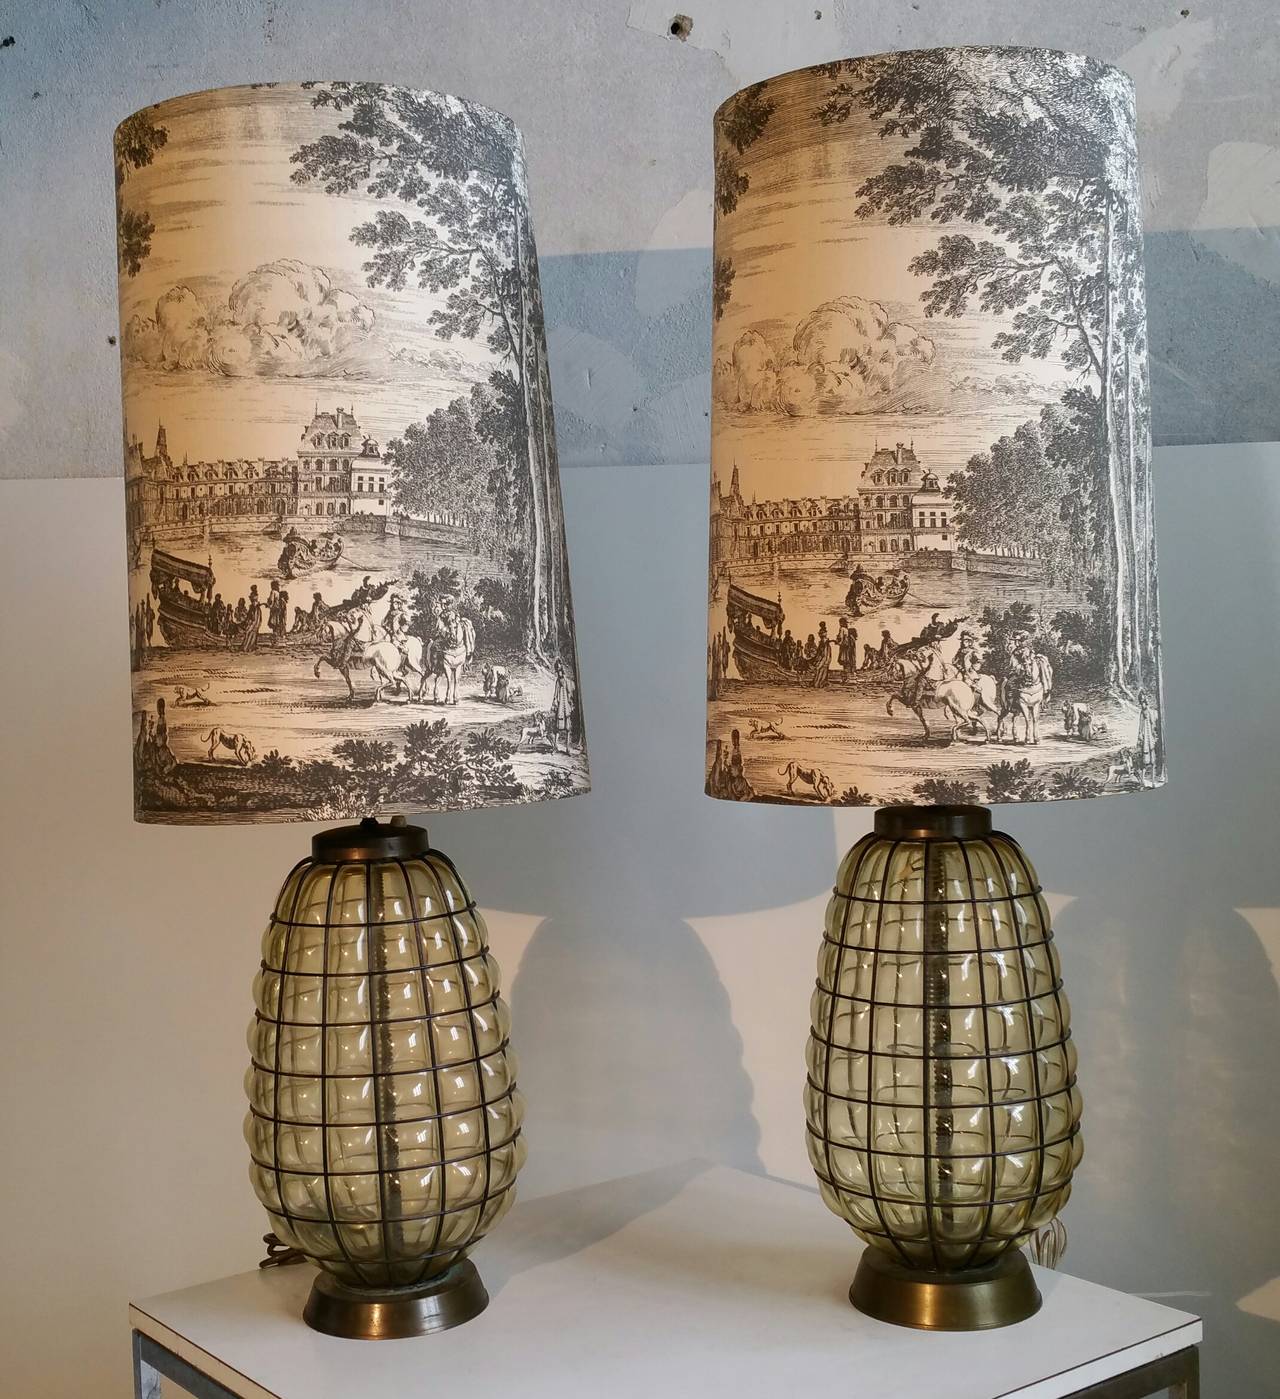 20th Century Pair of Blown Glass and Wire Lamps with Original Decorated Toile Fabric Shades